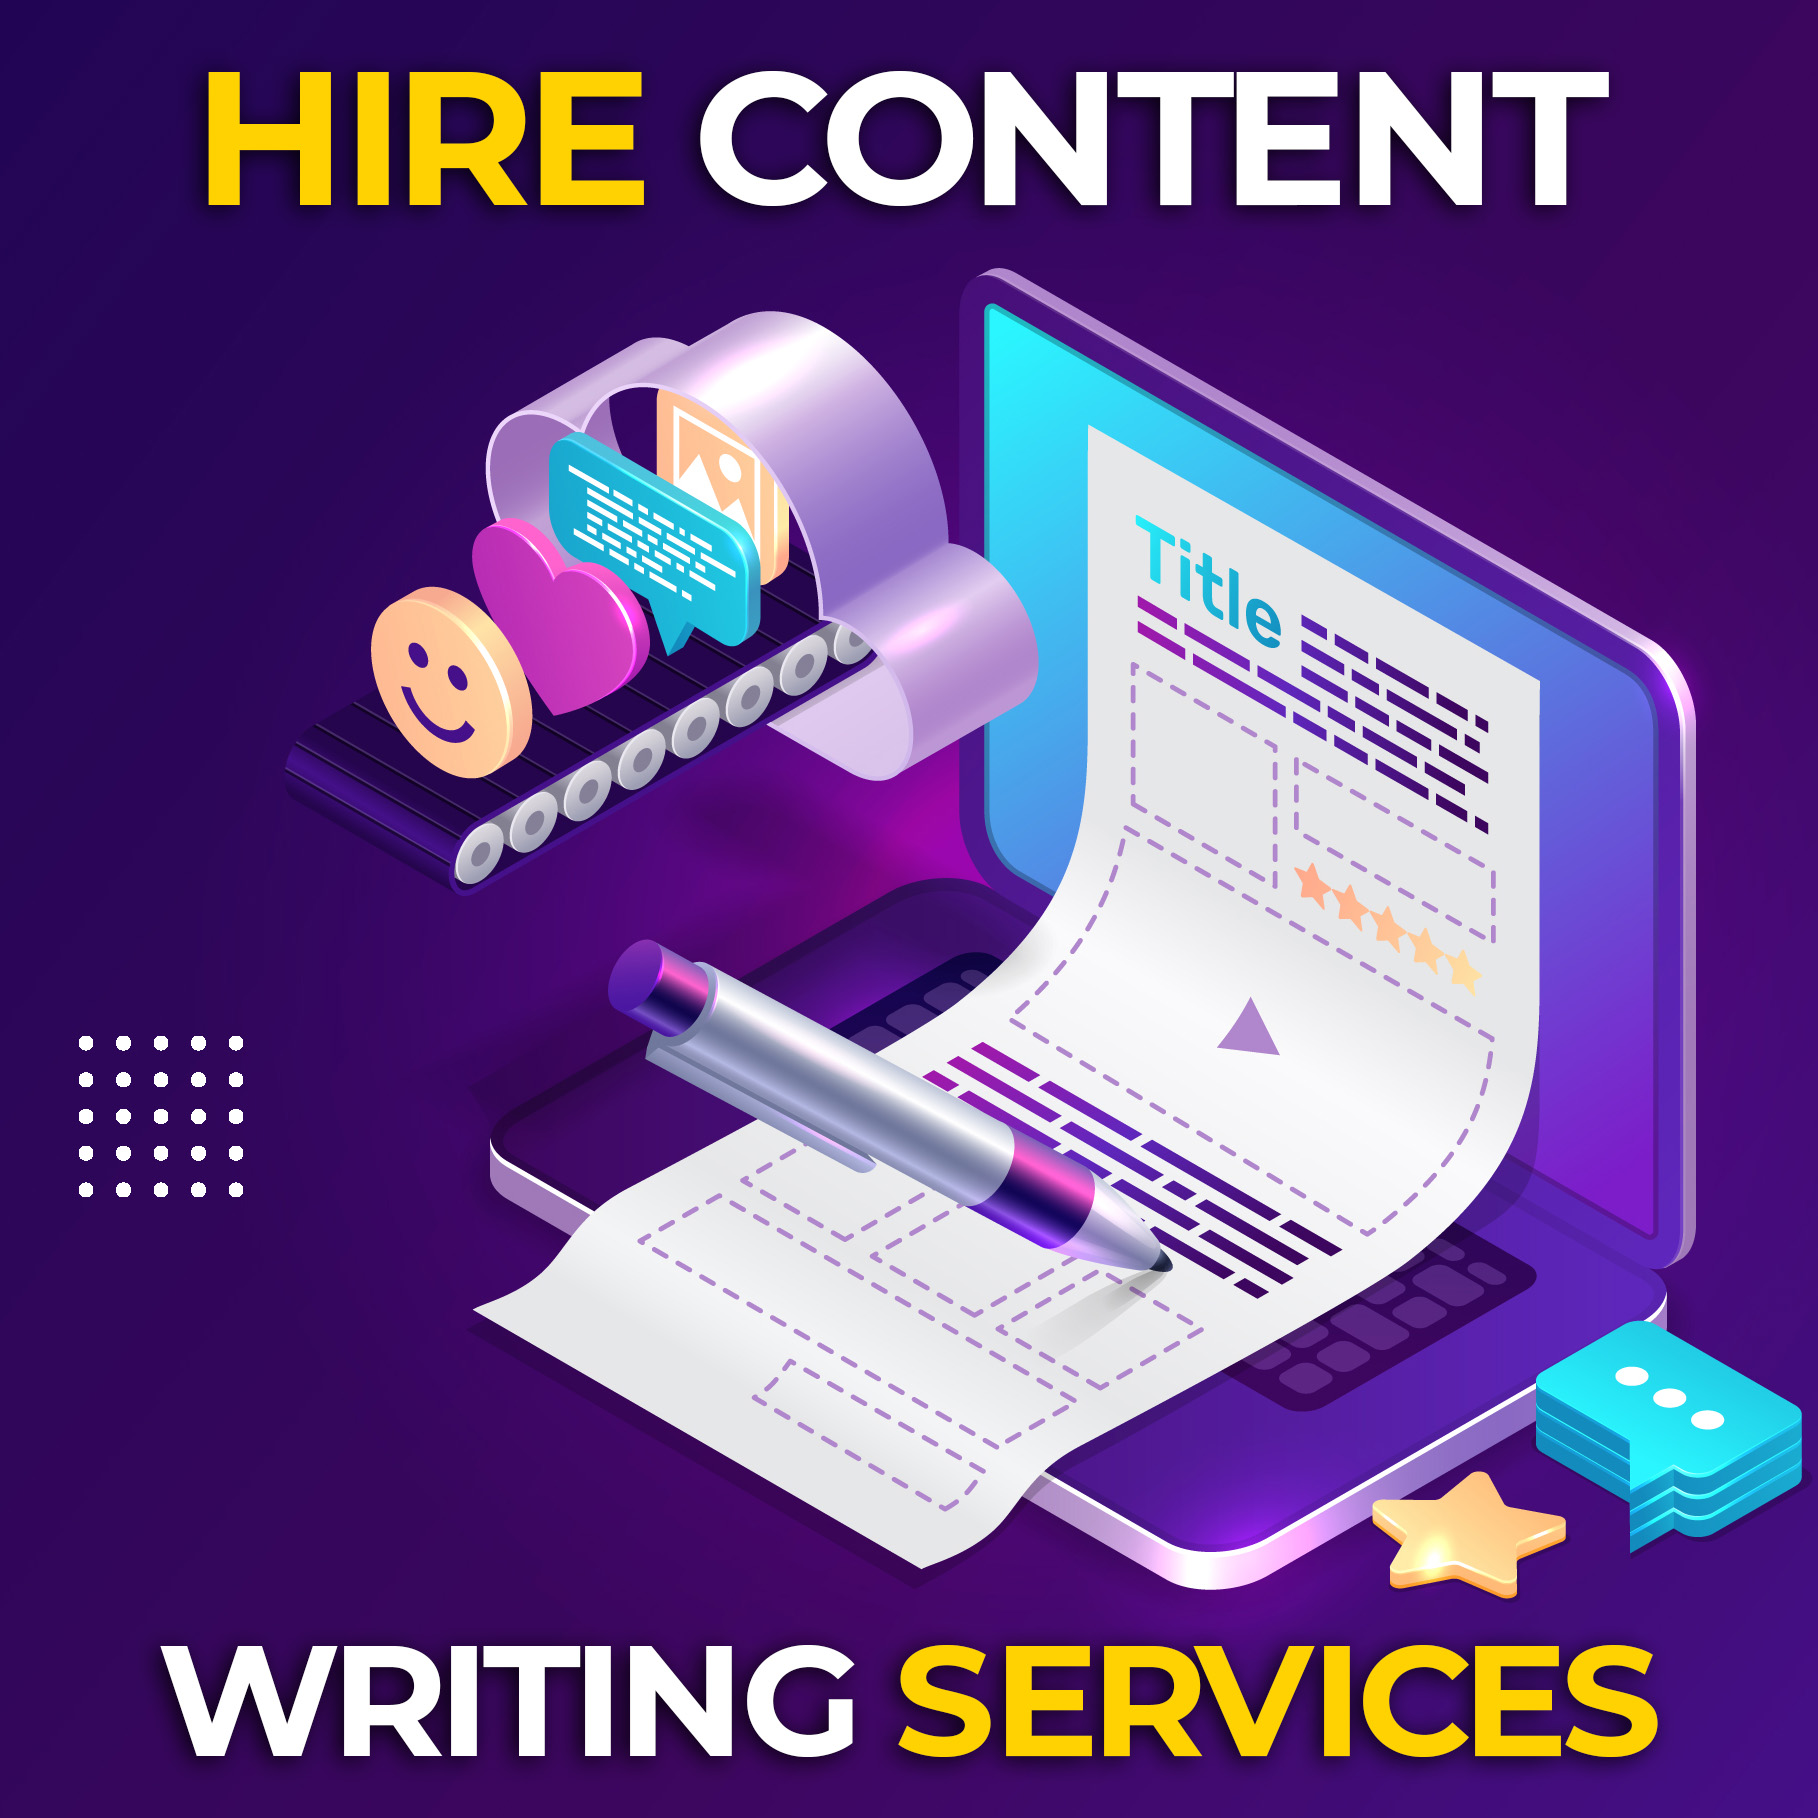 Hire Content Writing Services